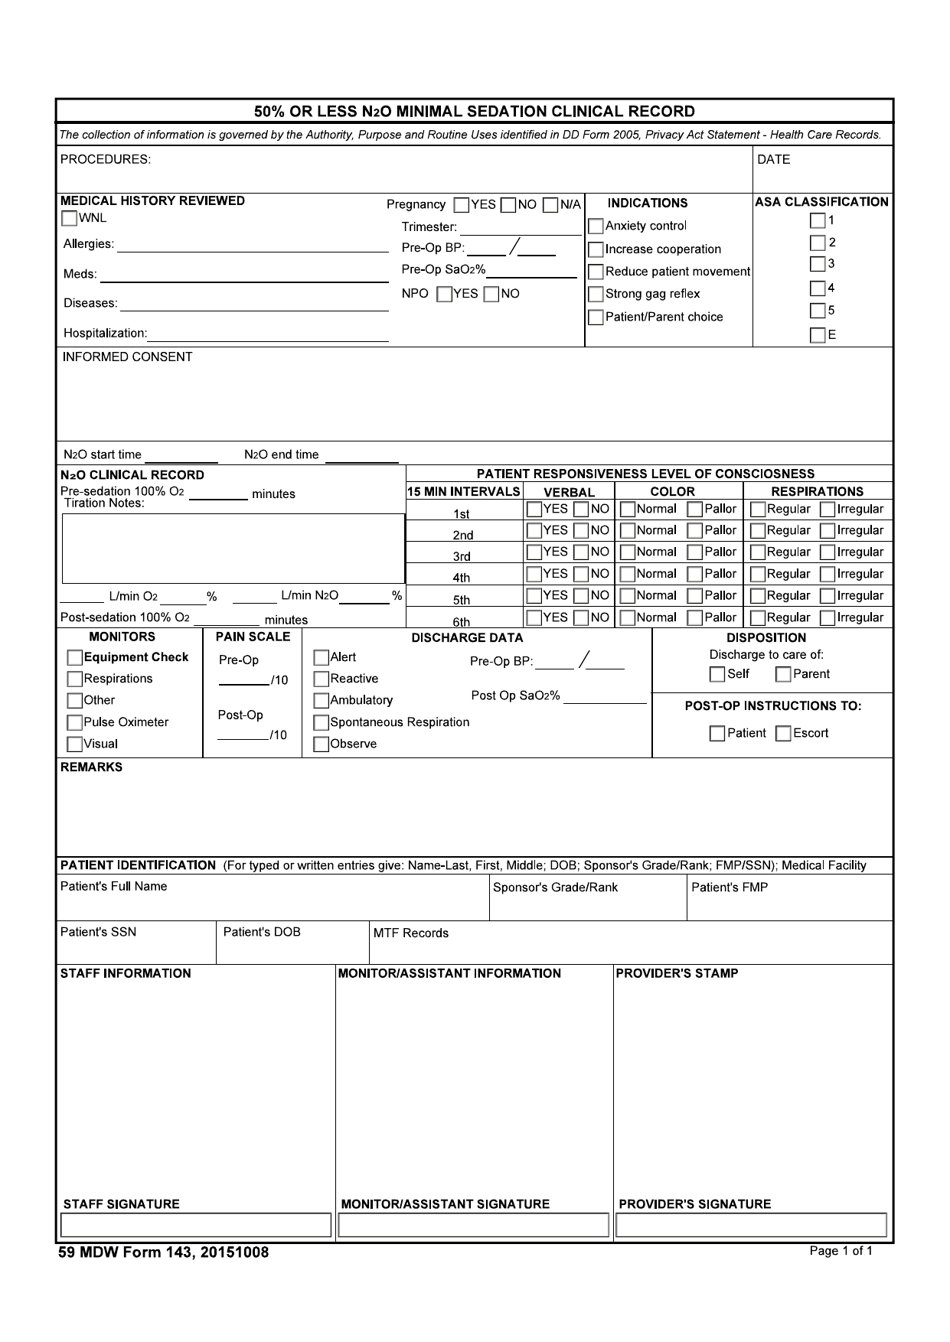 59 MDW Form 143 50% or Less N2o Minimal Sedation Clinical Record, Page 1